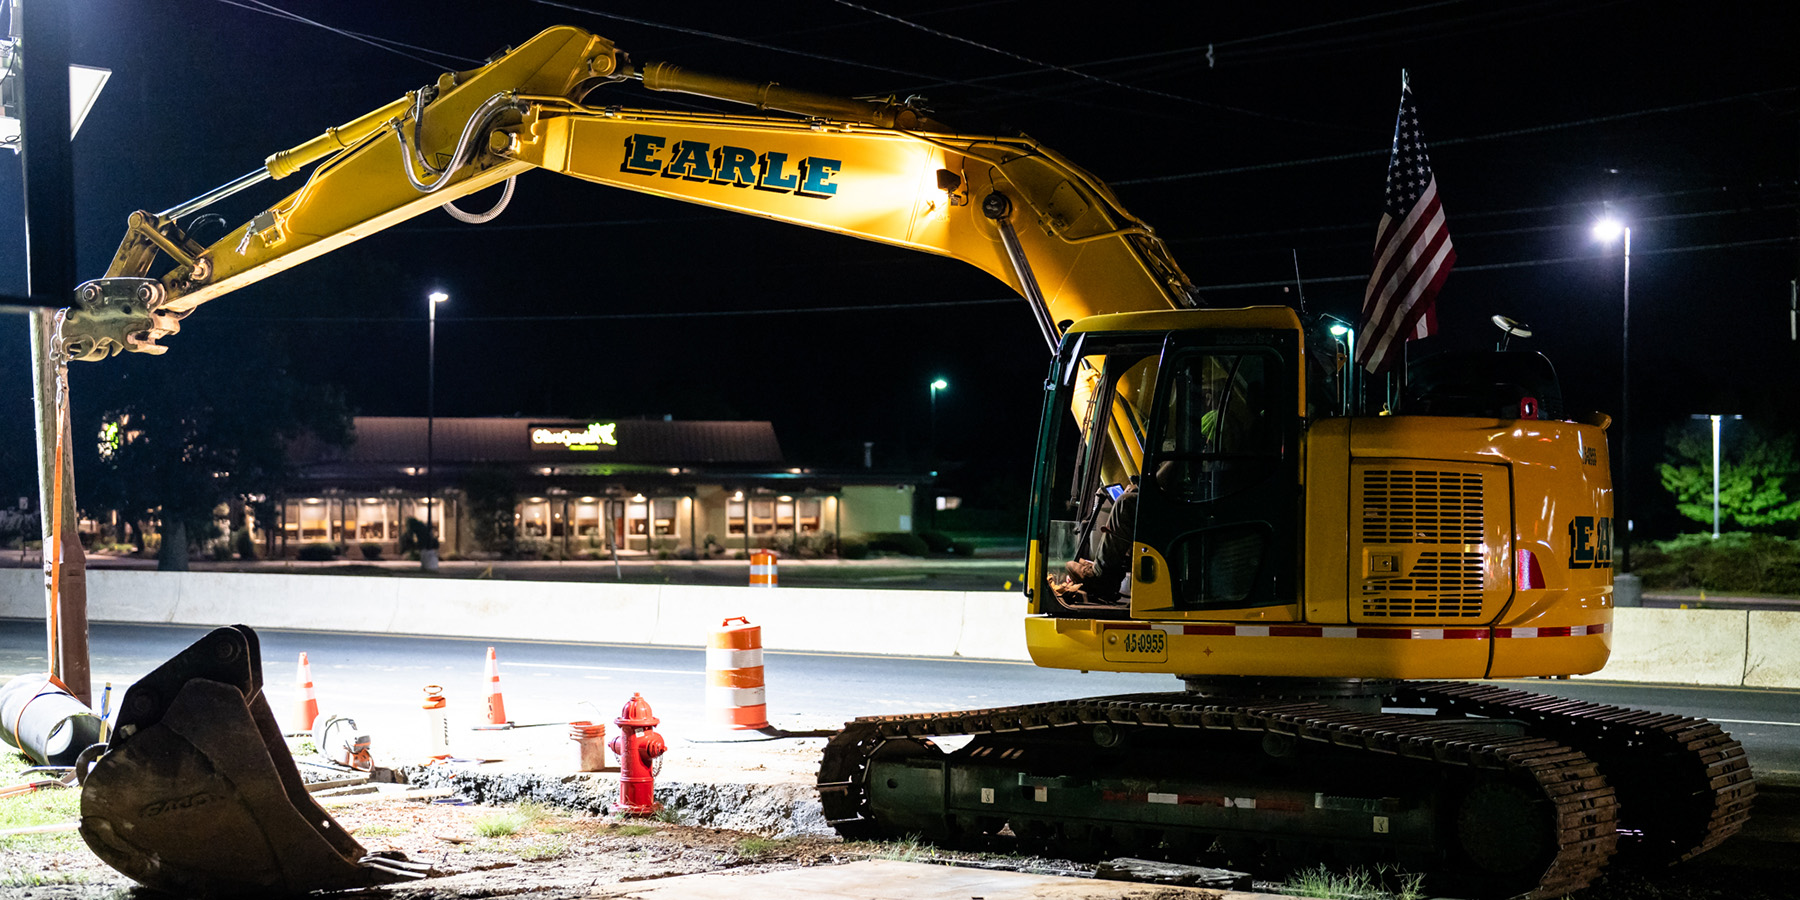 An Earle crane rests at a night time job site in New Jersey